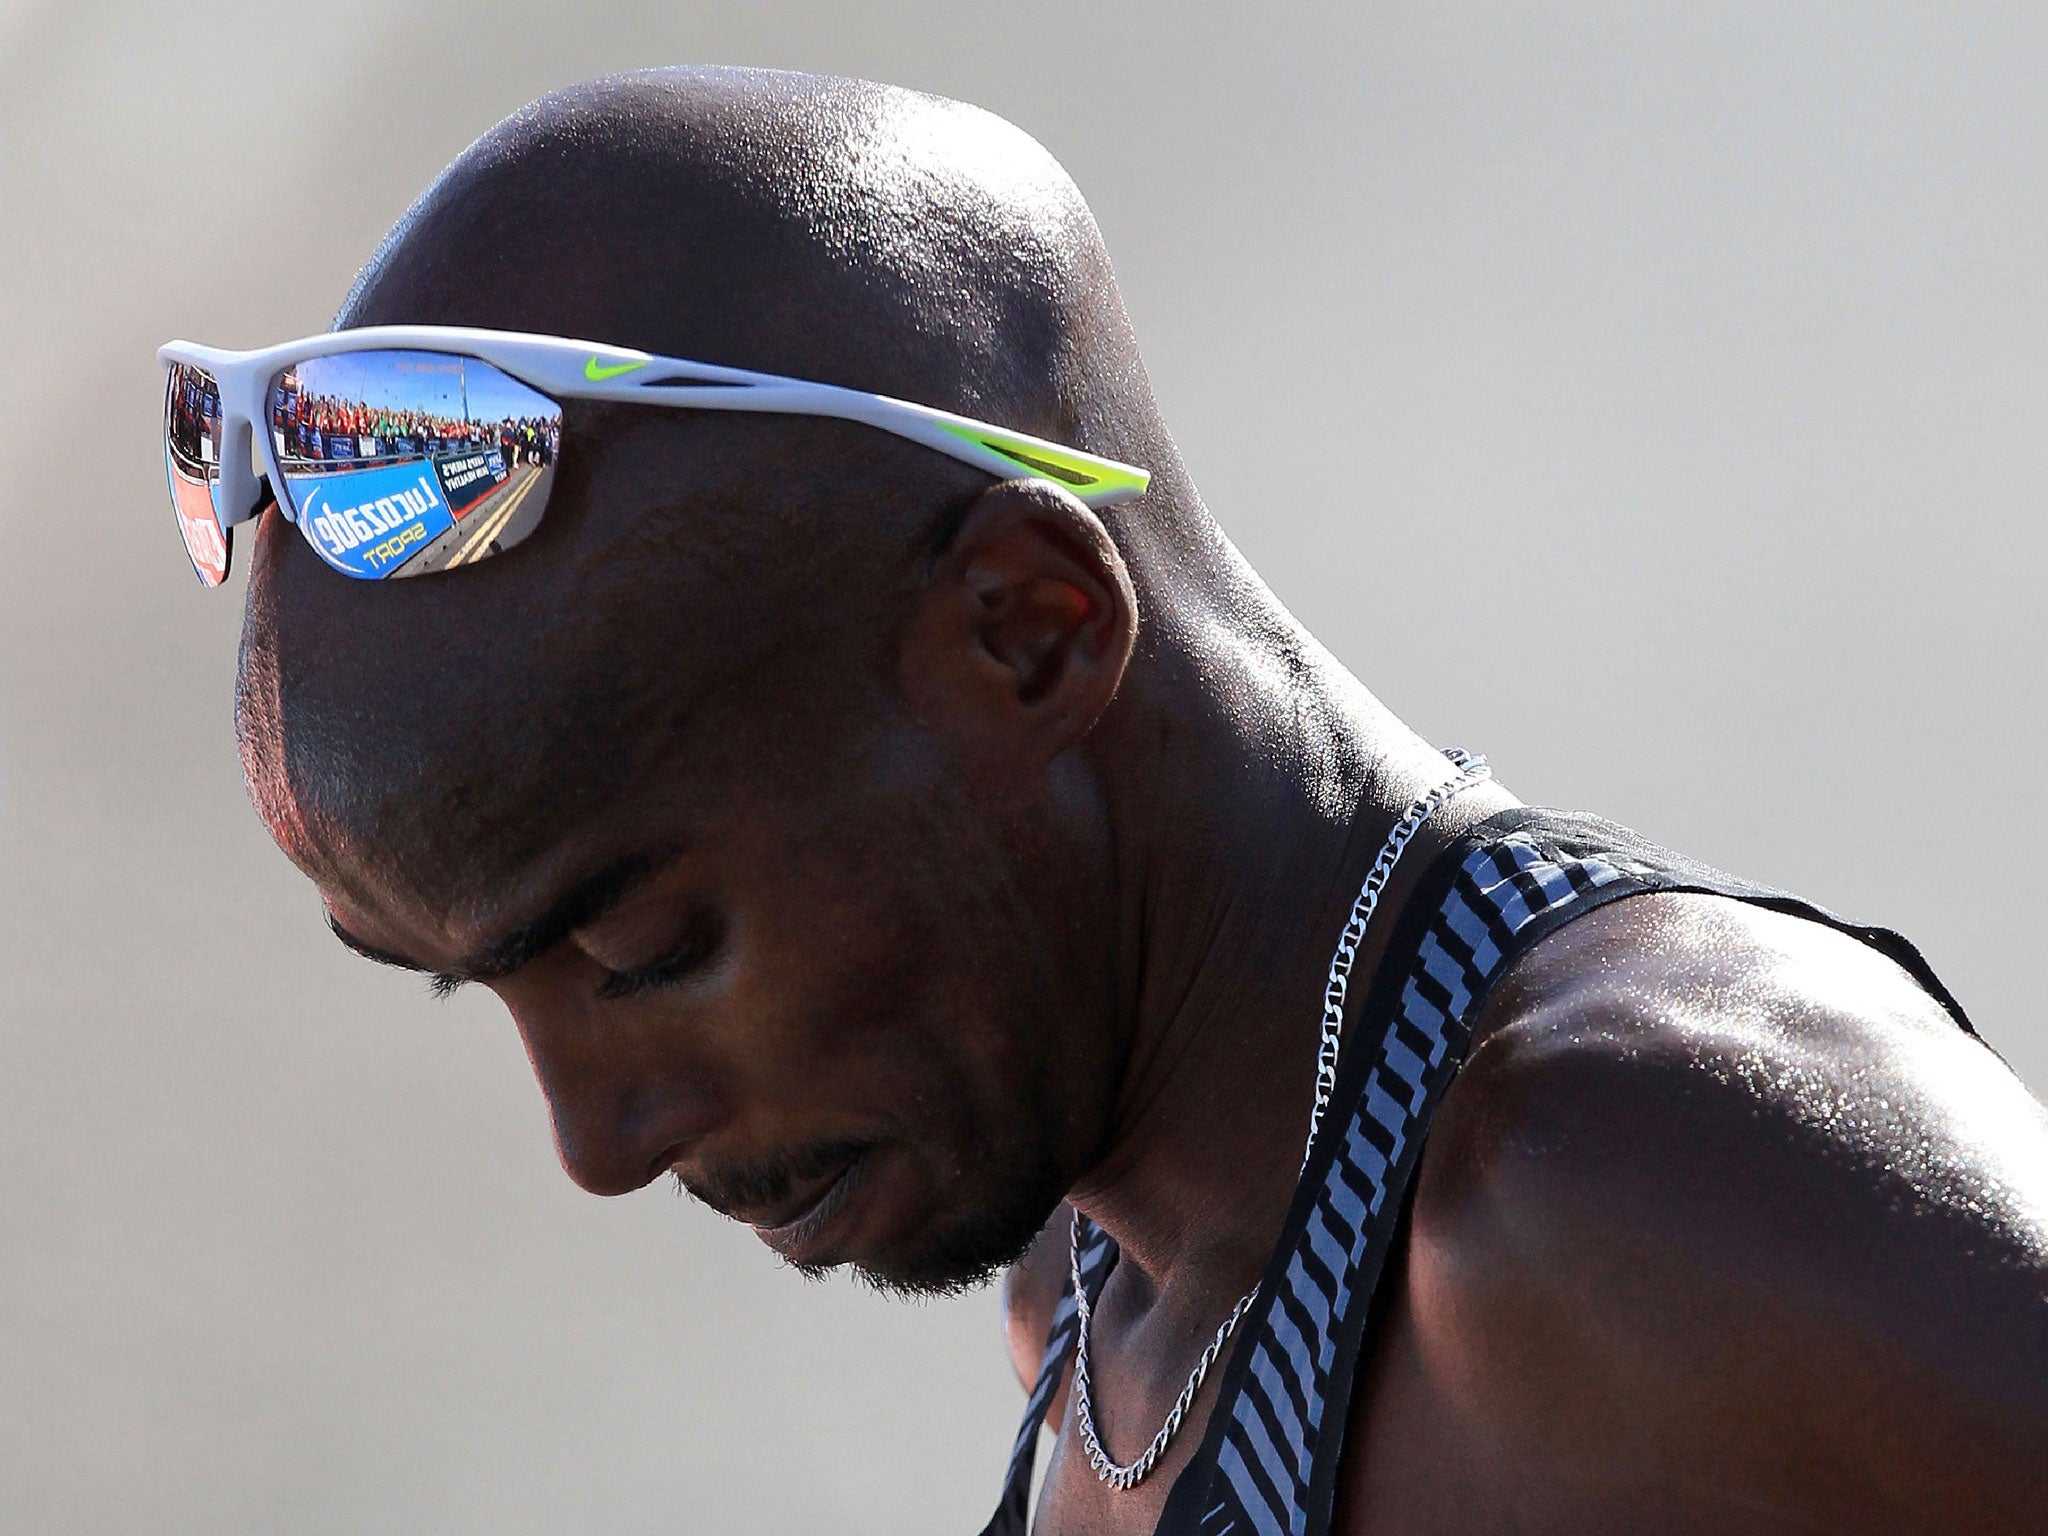 Mo Farah says associations made between him and drug misuse allegations are 'upsetting' and 'deeply frustrating'